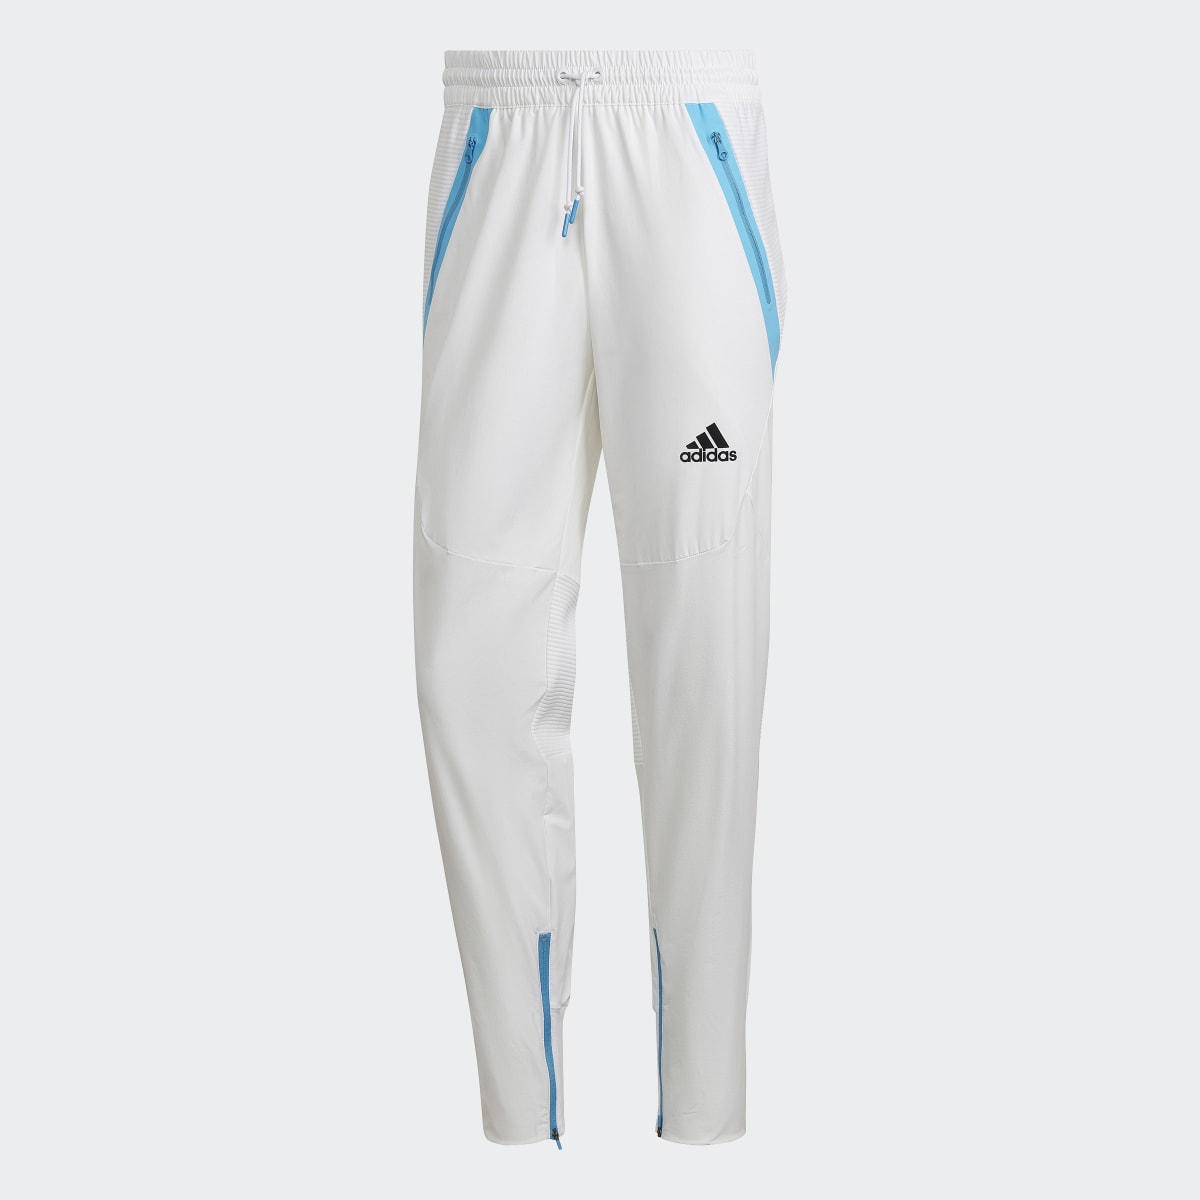 Adidas Designed for Gameday Tracksuit Bottoms. 5